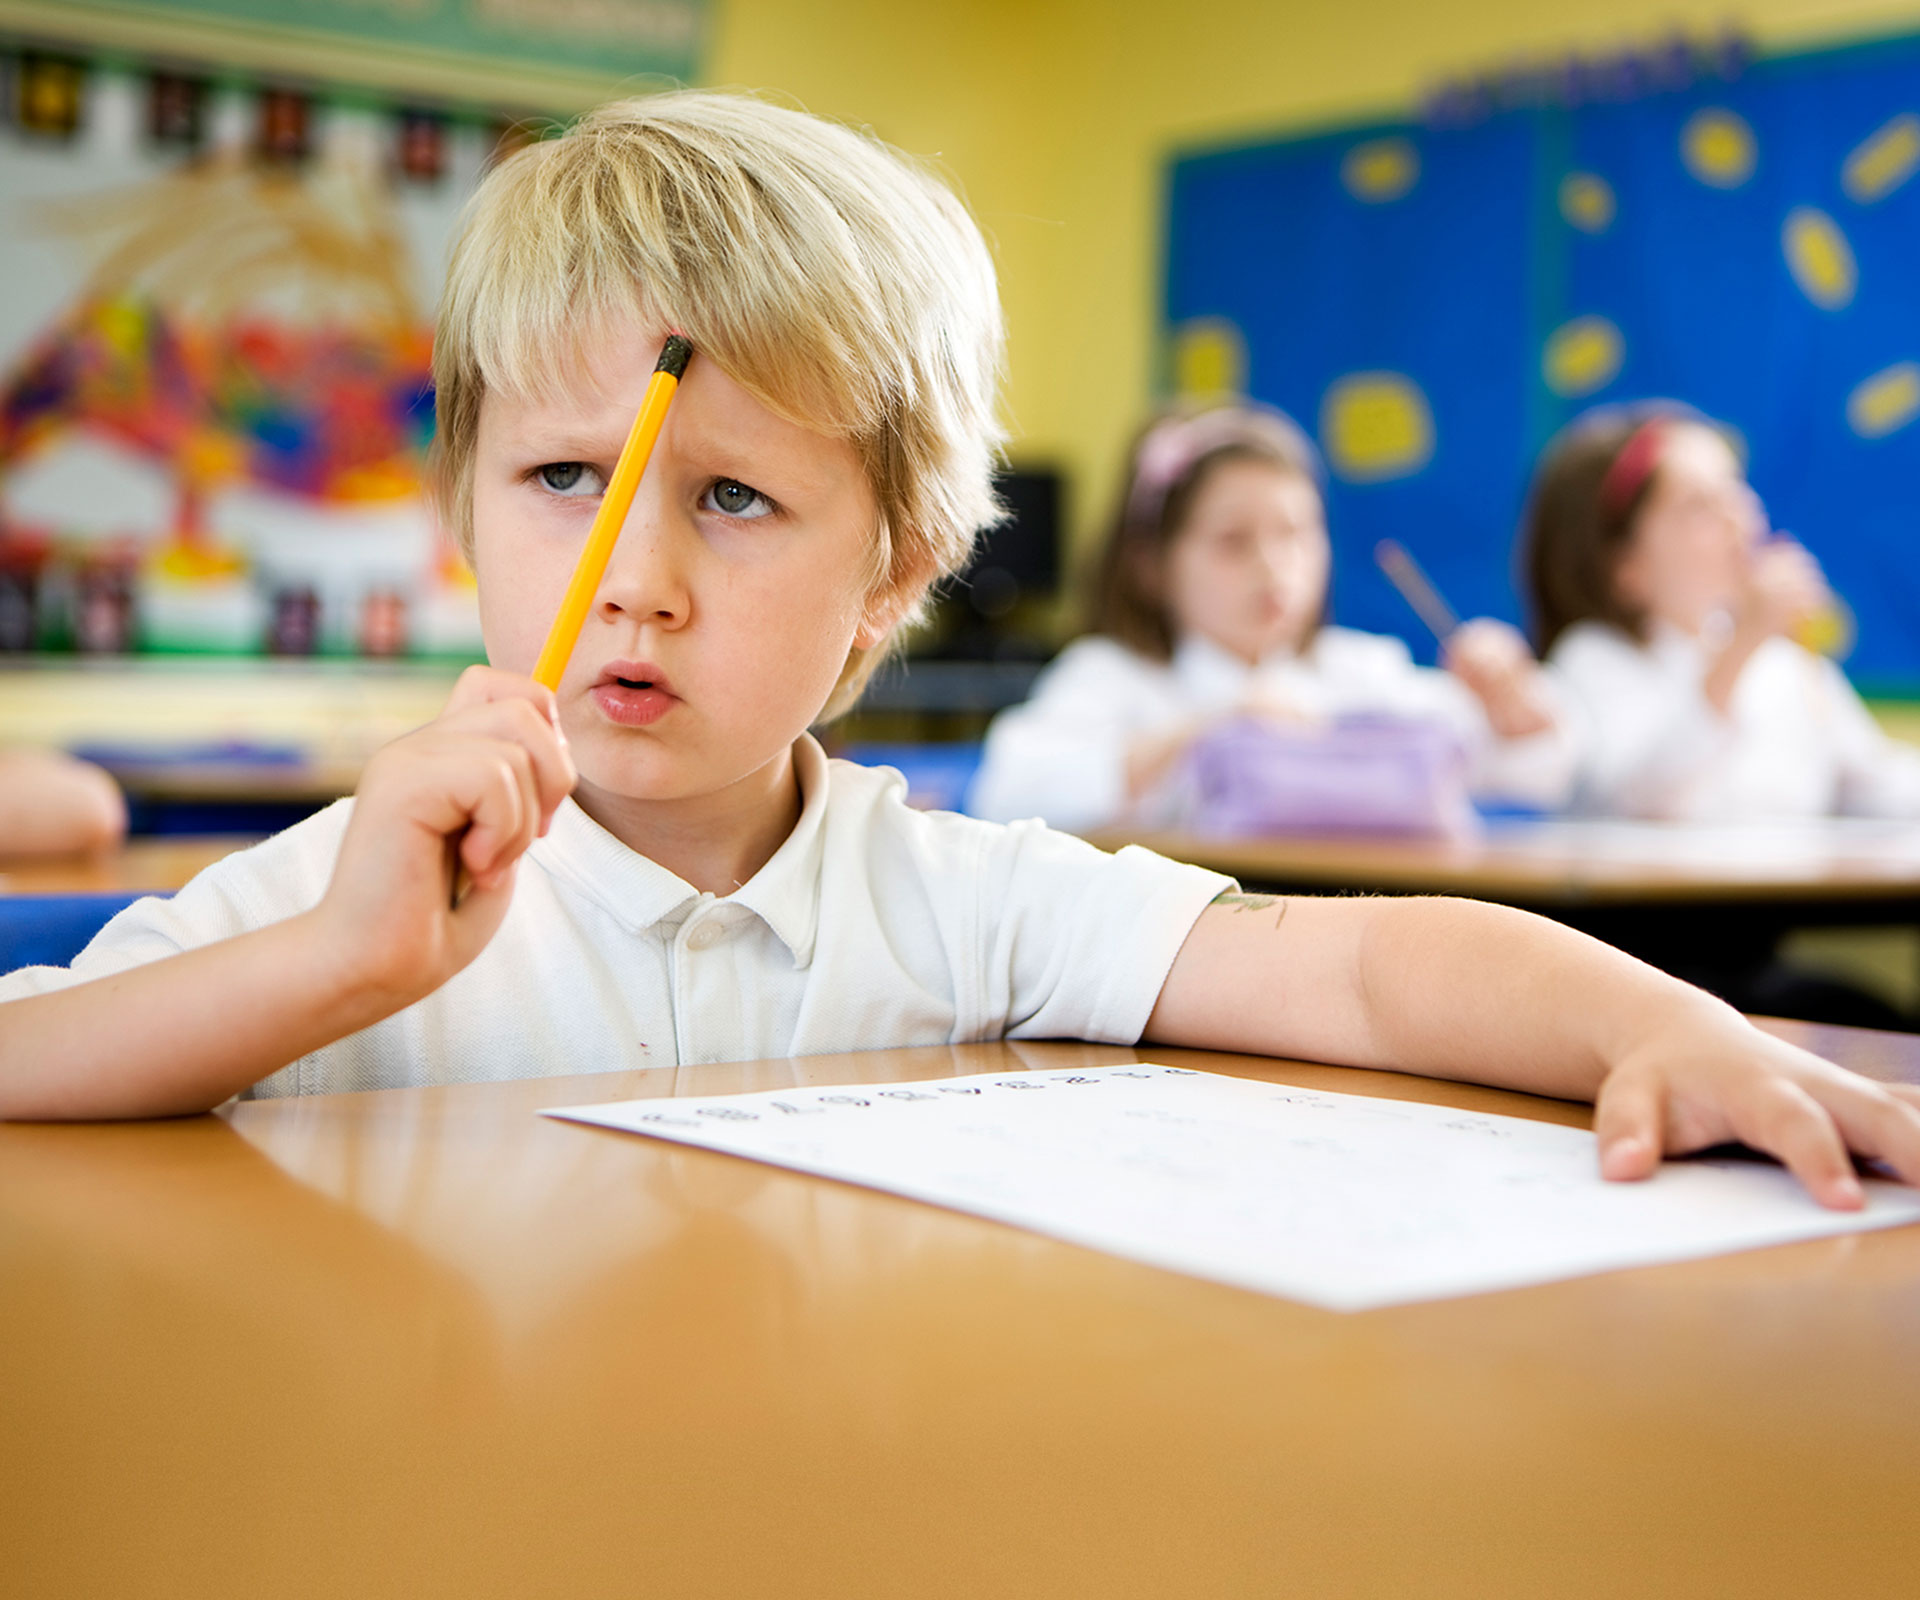 Could your child have auditory processing disorder?